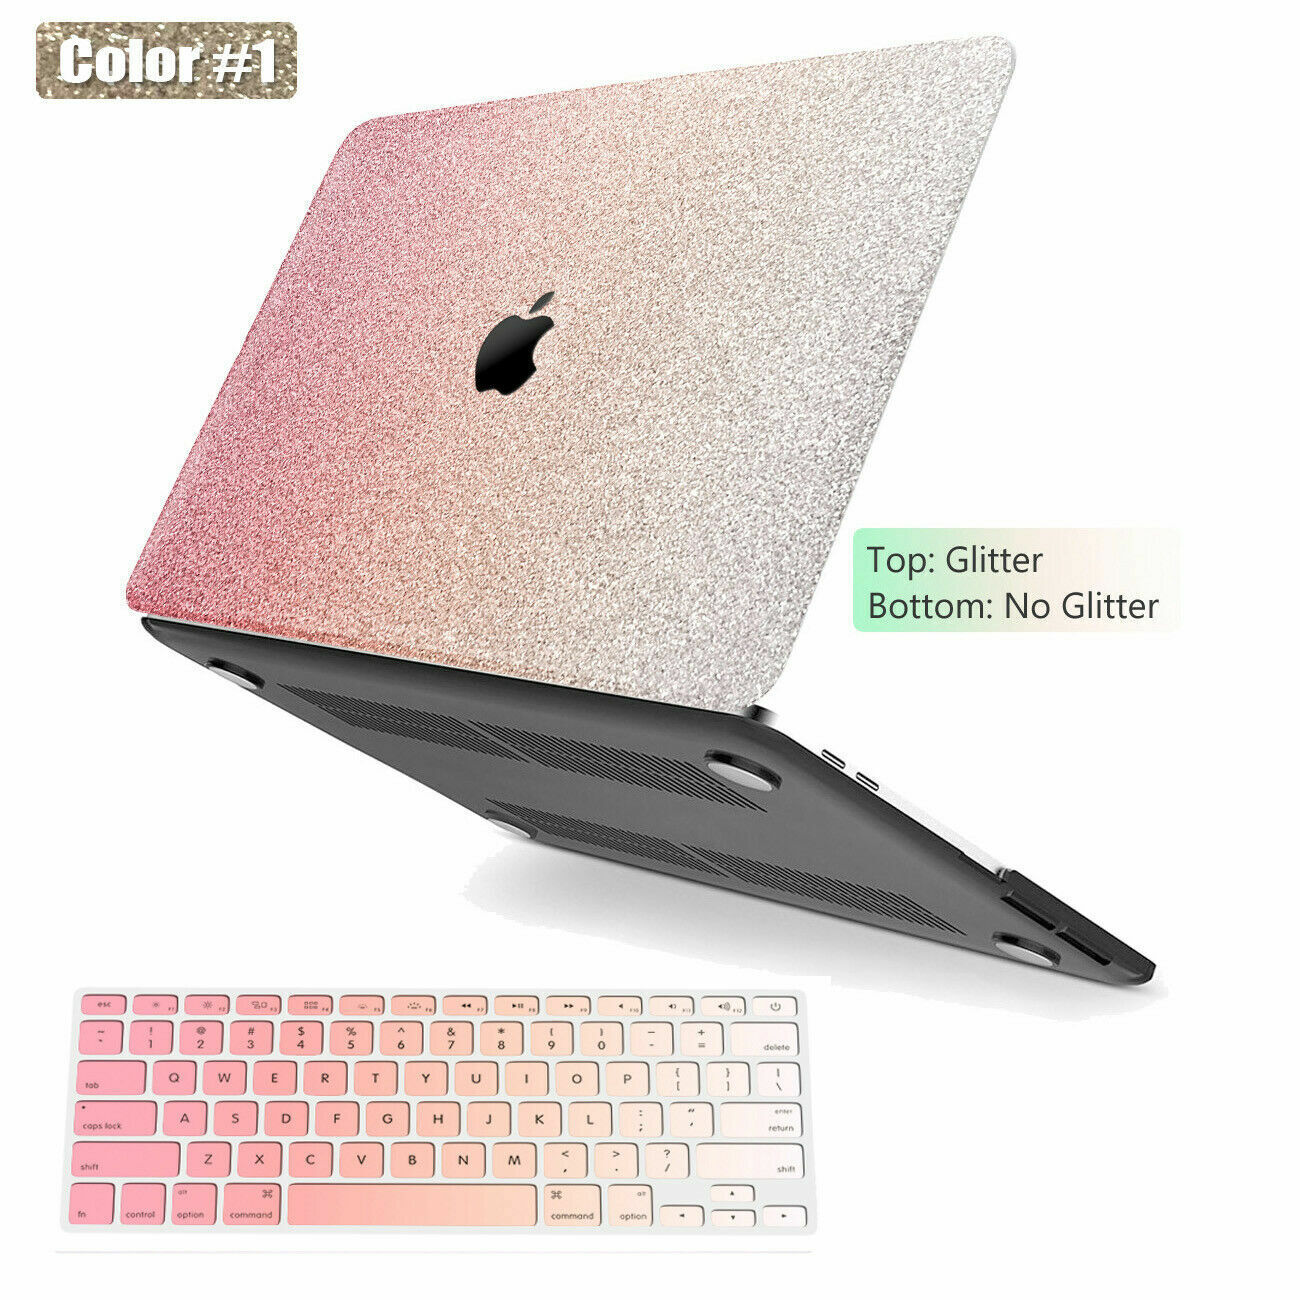 2021 Bling Sparkly Shinny Glitter Rubberized Hard Case Cover For Macbook Air Pro